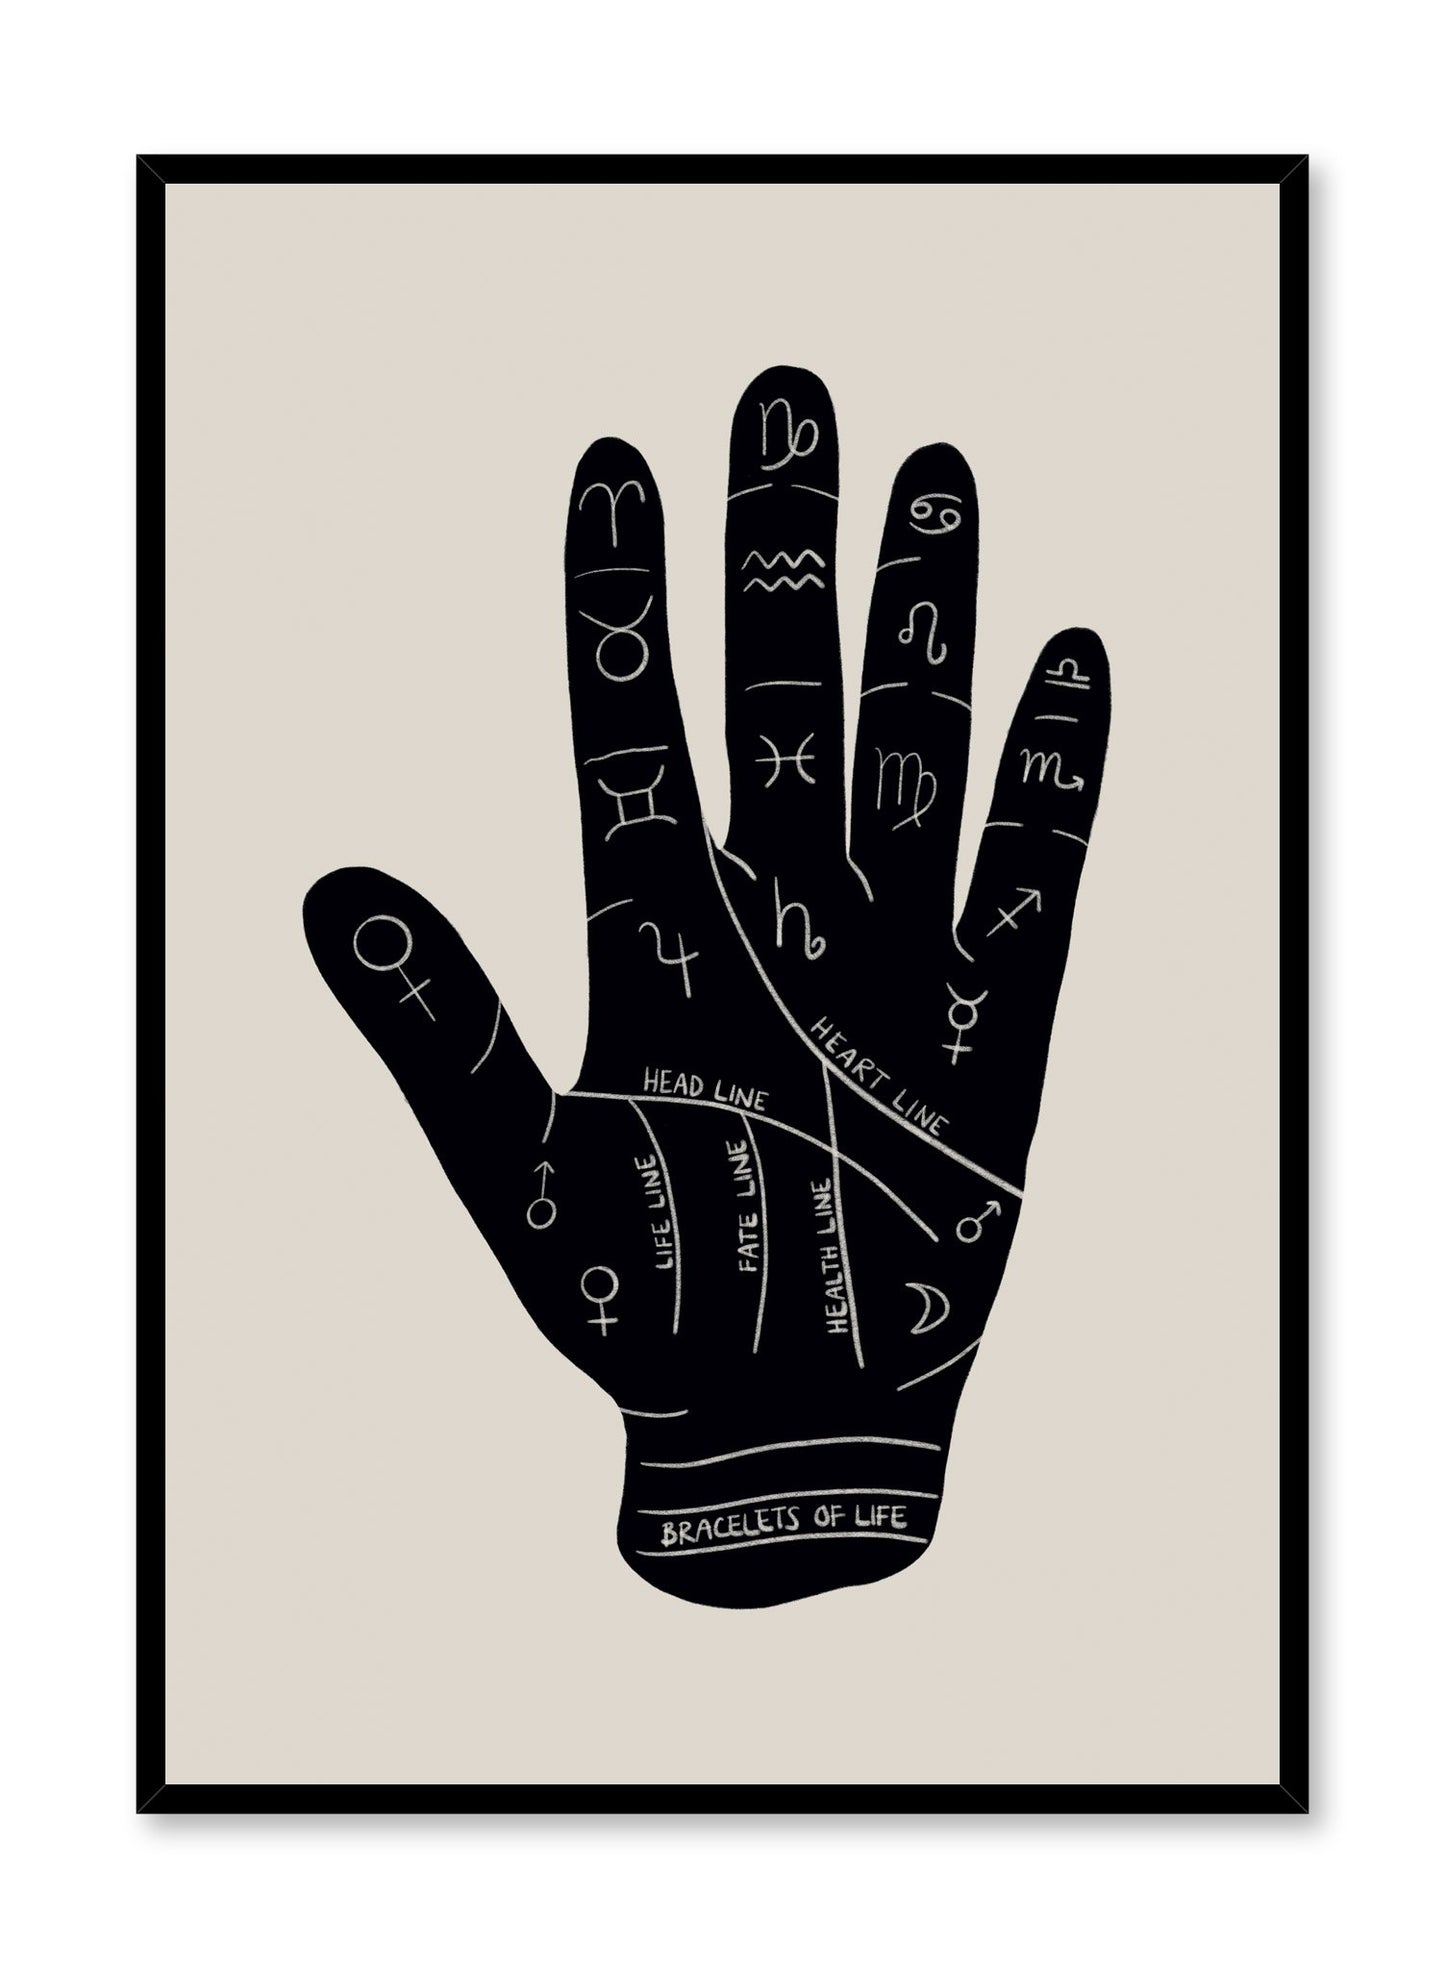 Celestial illustration poster by Opposite Wall with Palmistry drawing